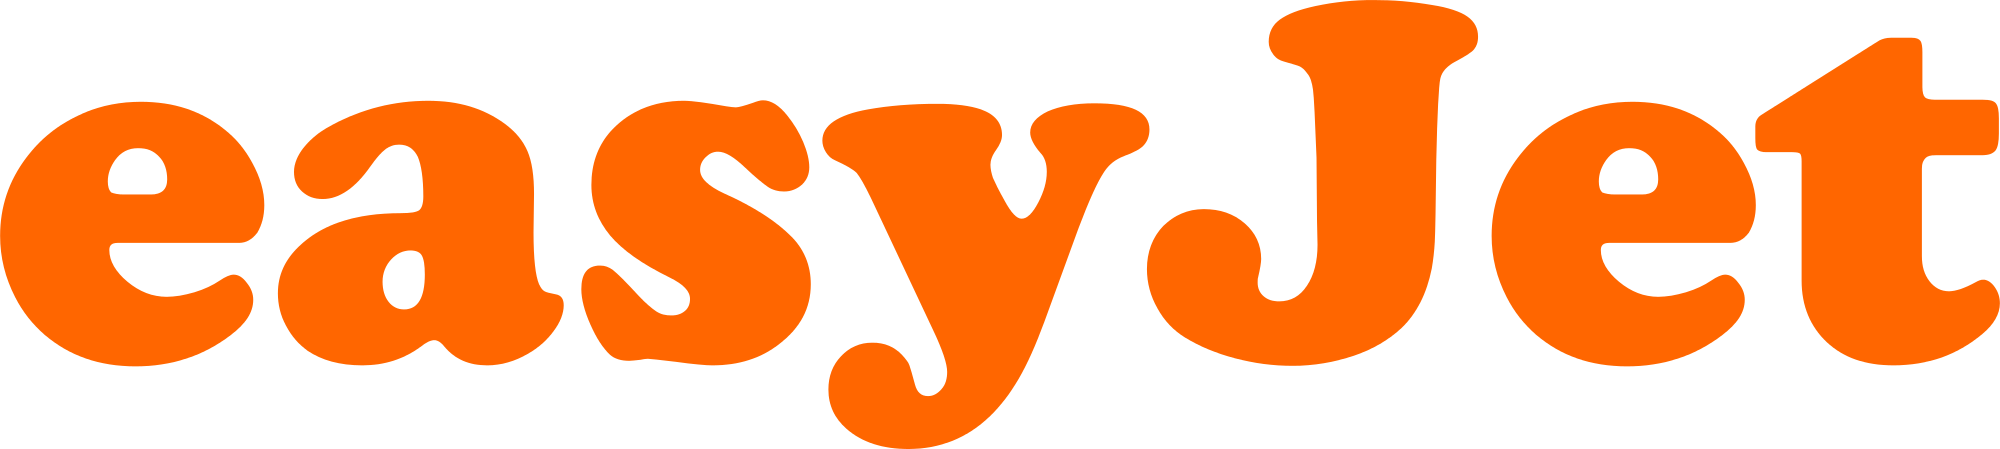 Get To Know Your Arrival Lounge And Where To Go From - Easyjet Logo Png (2000x449)